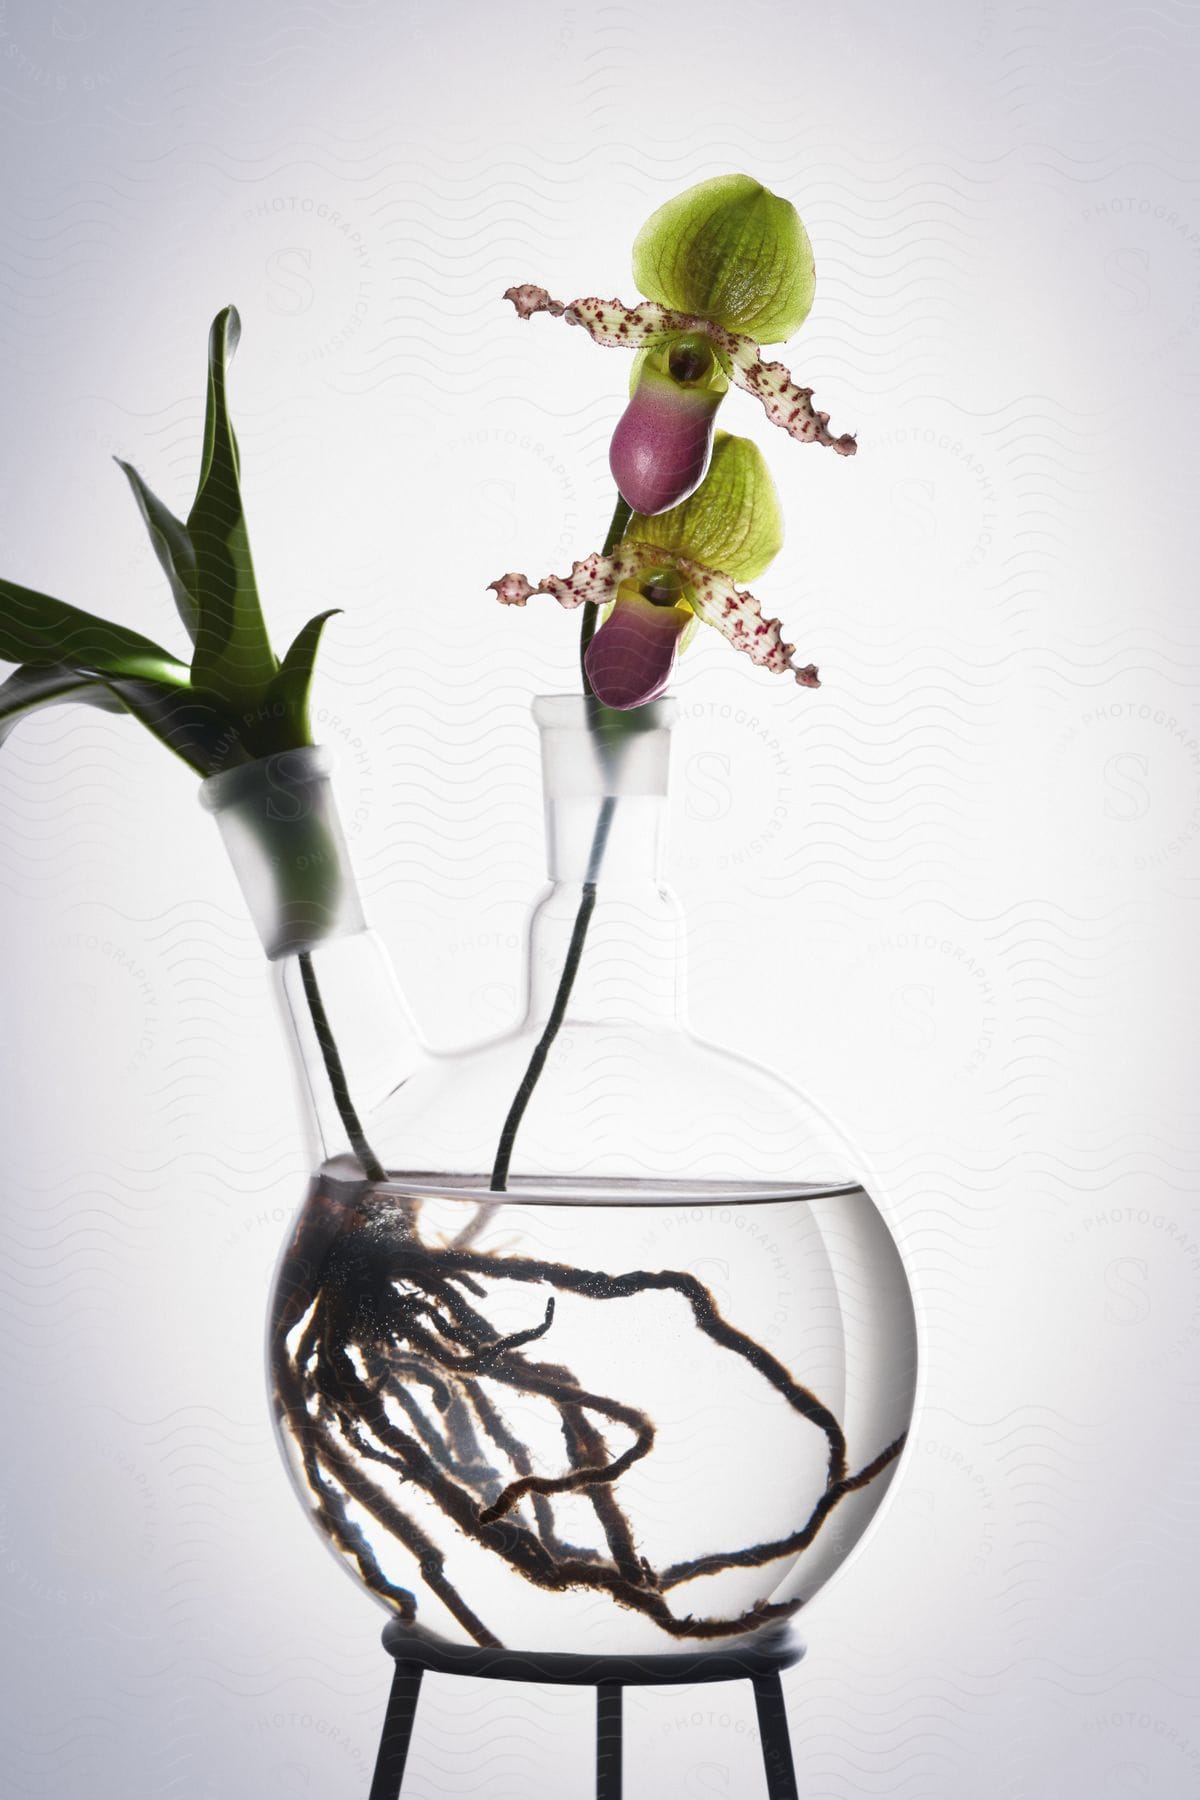 Orchid with green and purple petals in a clear glass flask on a metal stand, showcasing the roots in water.